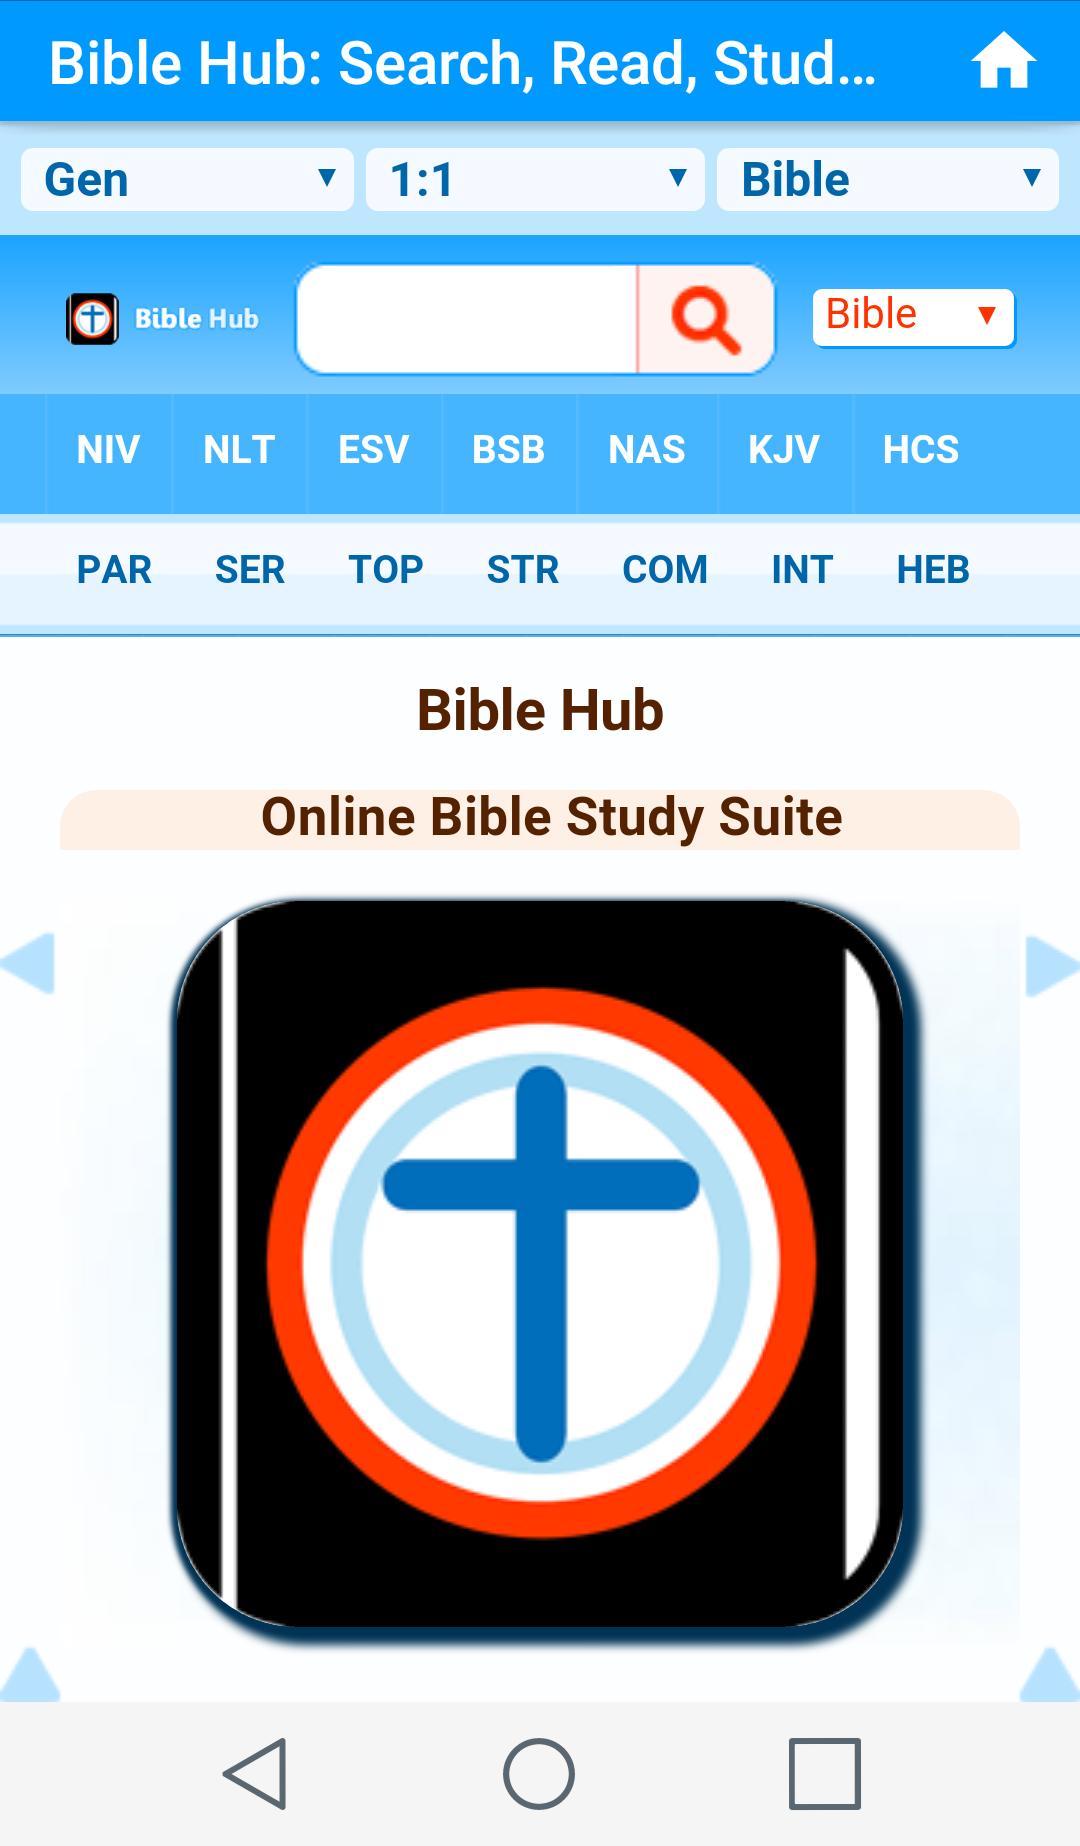 Bible Hub for Android - APK Download